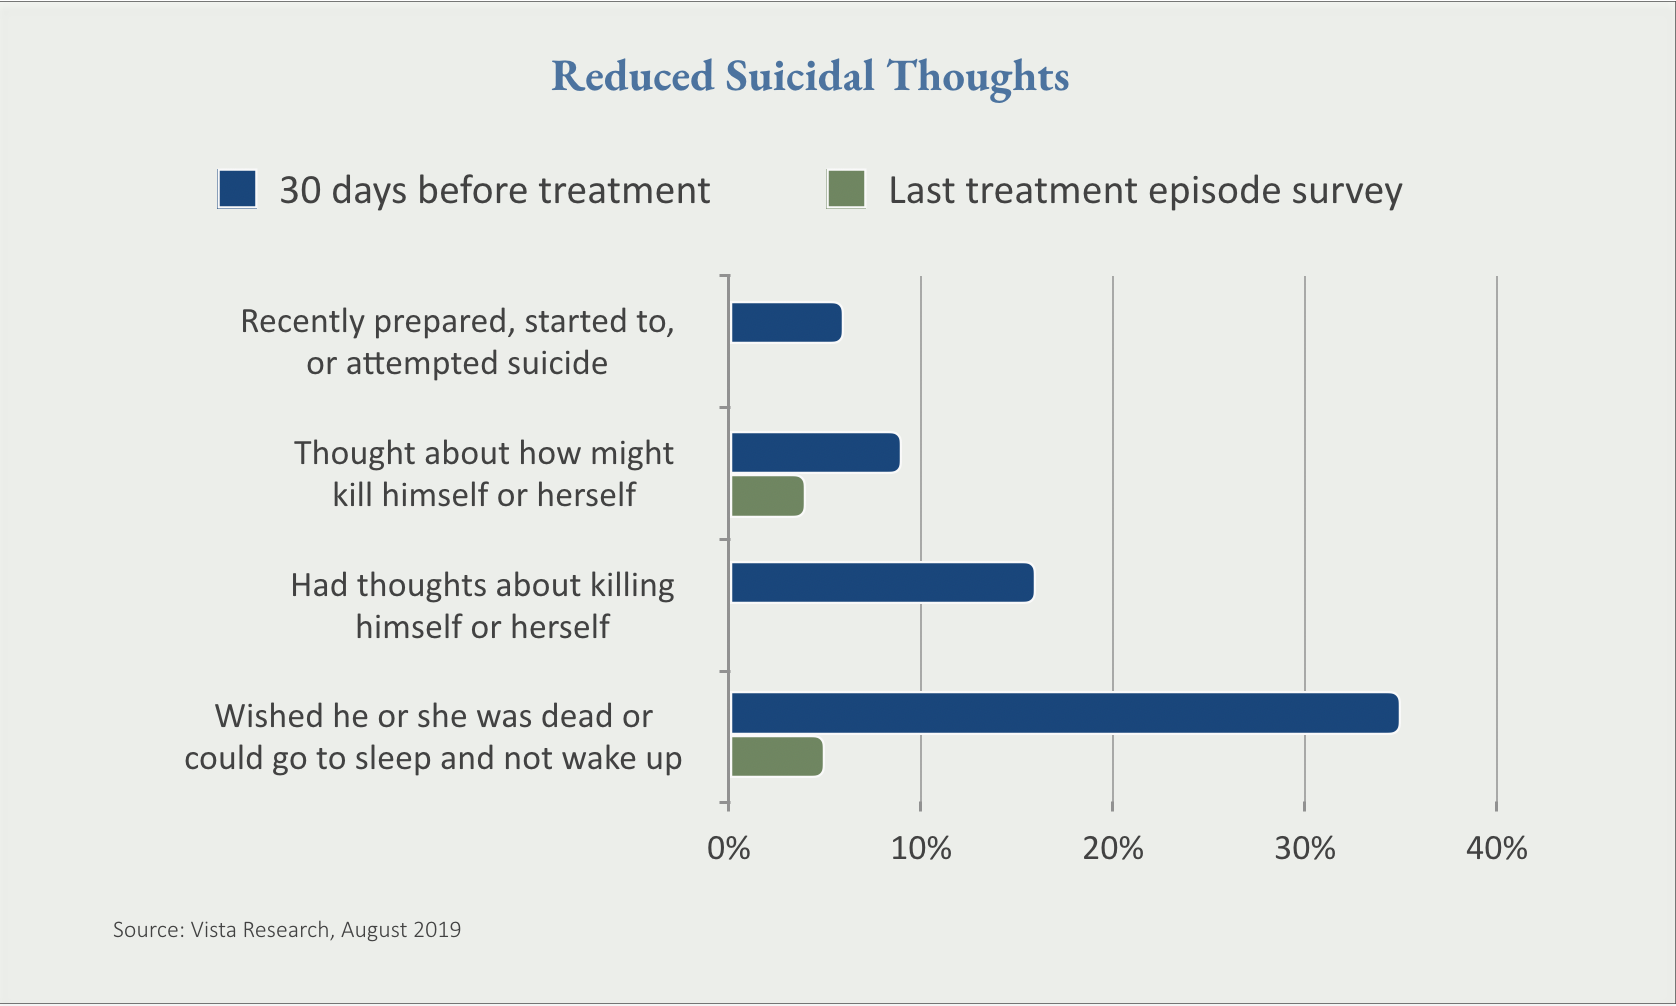 Reduced Suicidal Thoughts